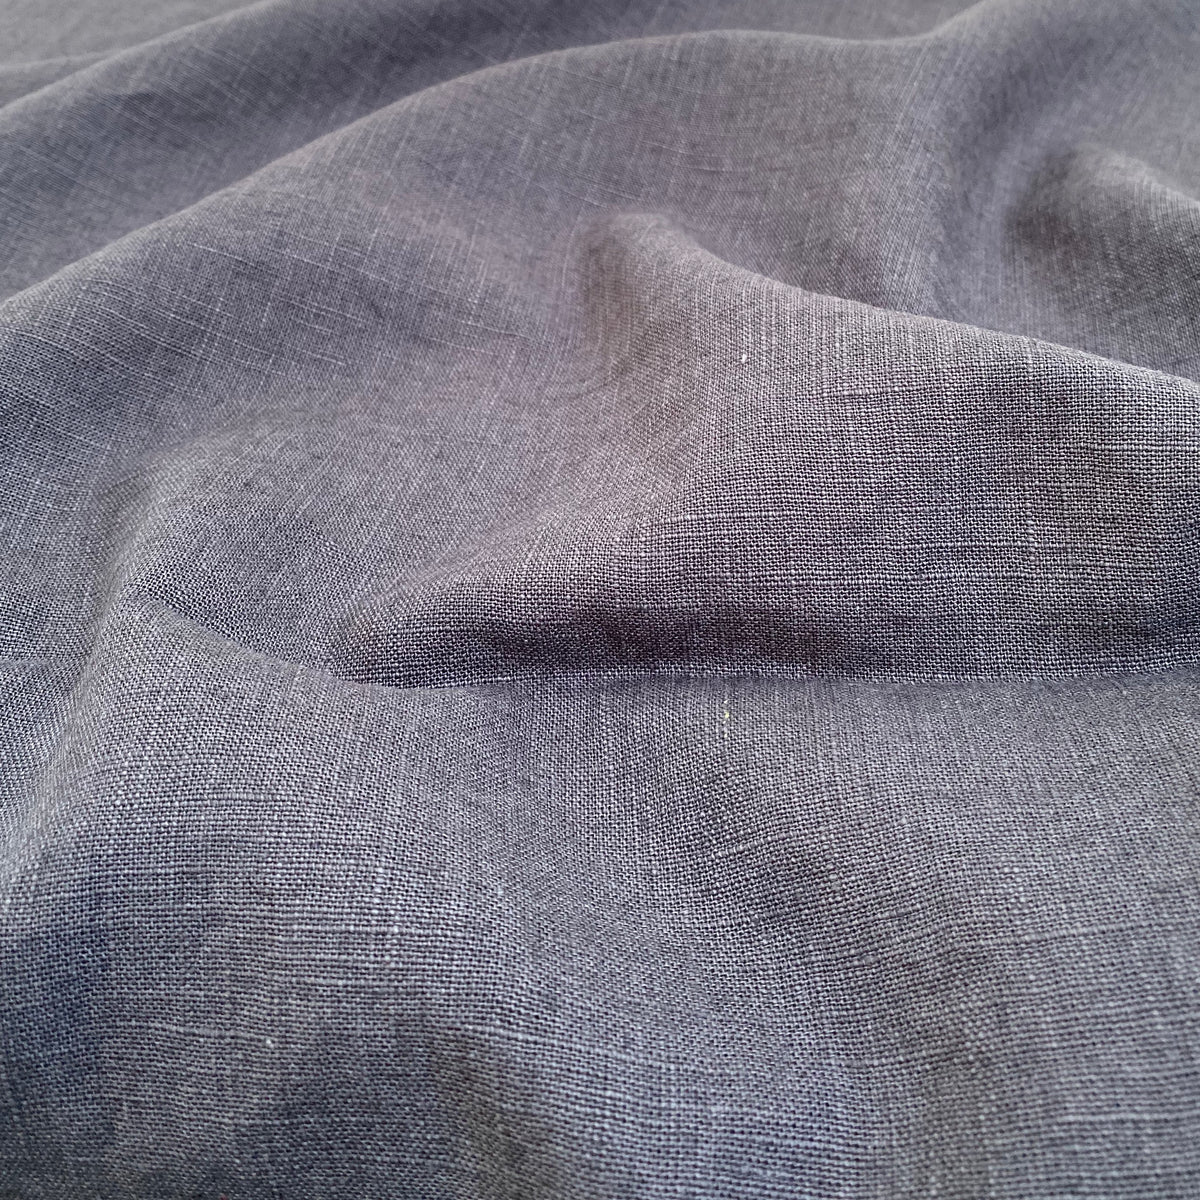 Enzyme Washed Linen - Anthracite Grey - 0.5 metre